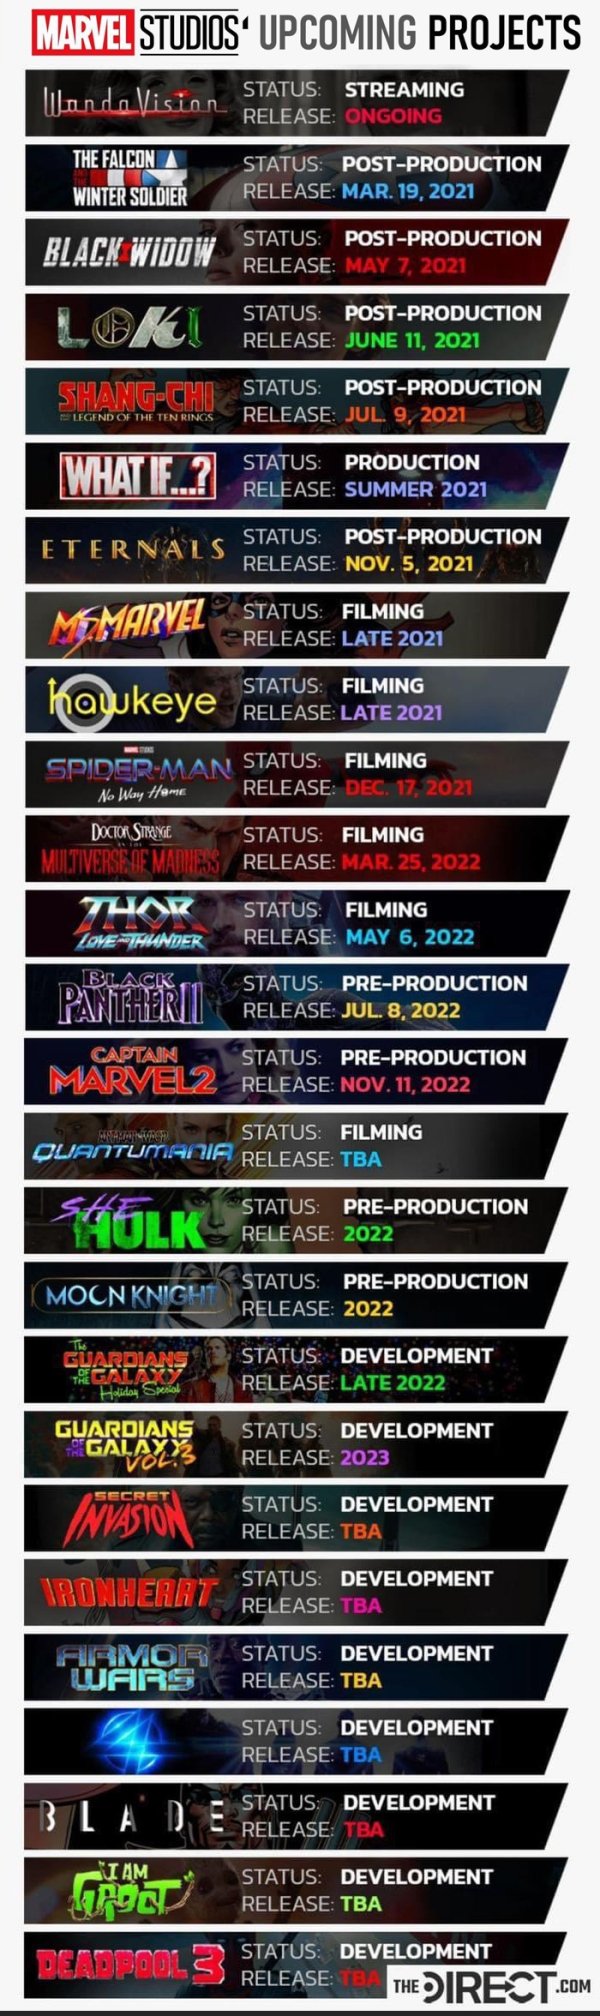 Marvel Studios Upcoming Projects llanda Vision Status Streaming Release Ongoing The Falcon A Winter Soldier Status PostProduction Release Mar. 19, 2021 Black Widow Status PostProduction Release Status PostProduction Release PostProduction ShangChi Status…